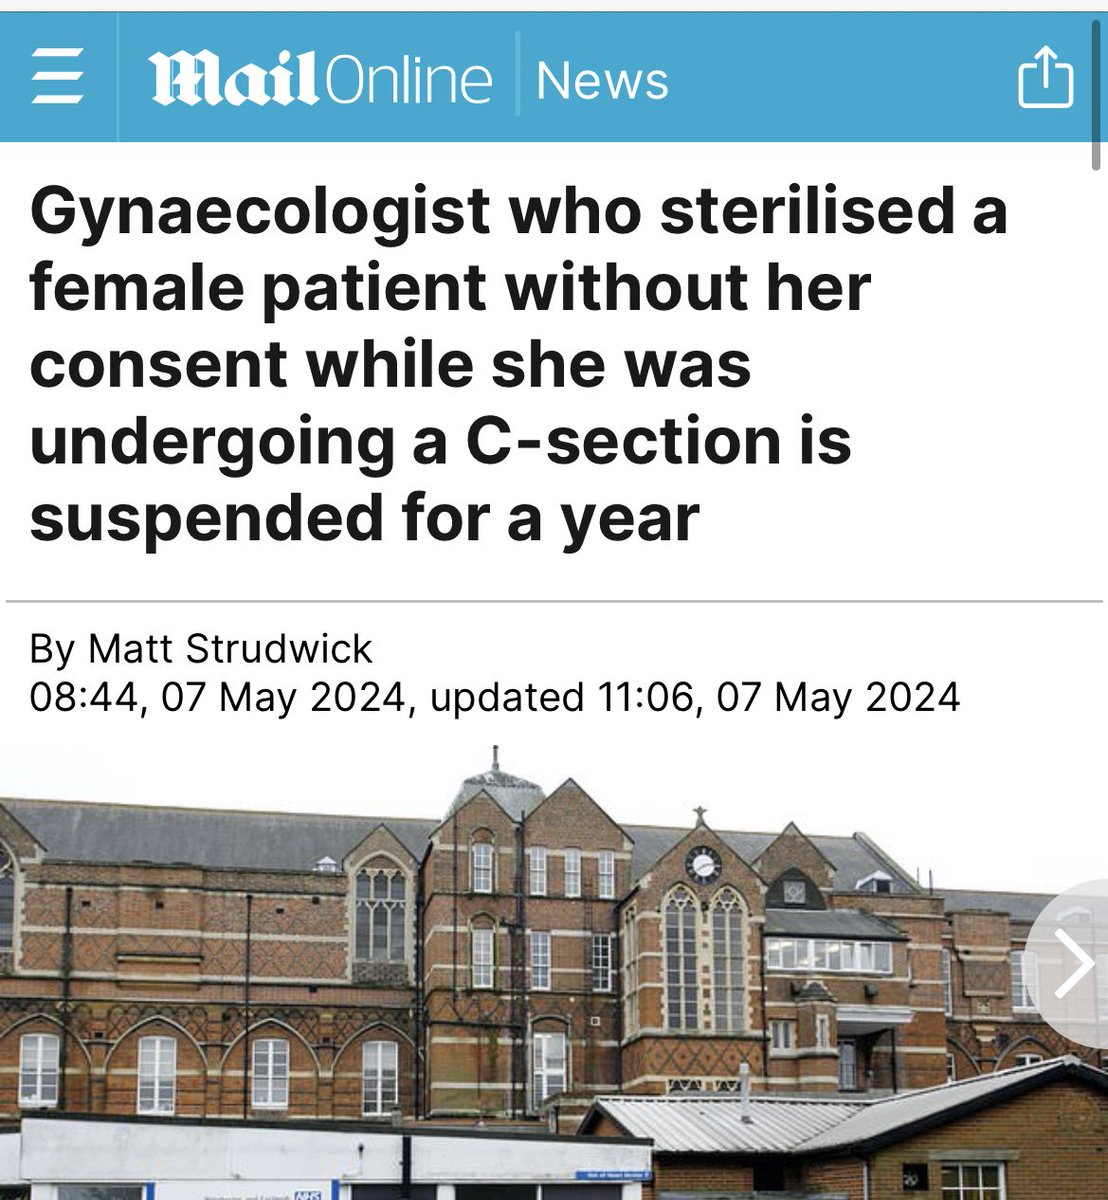 Male surgeon. Non consensual sterilisation of a woman just after her baby’s birth. “Limited reflection” after the incident from the perpetrator. This is egregious. 1 year suspension. What is going on @gmcuk?